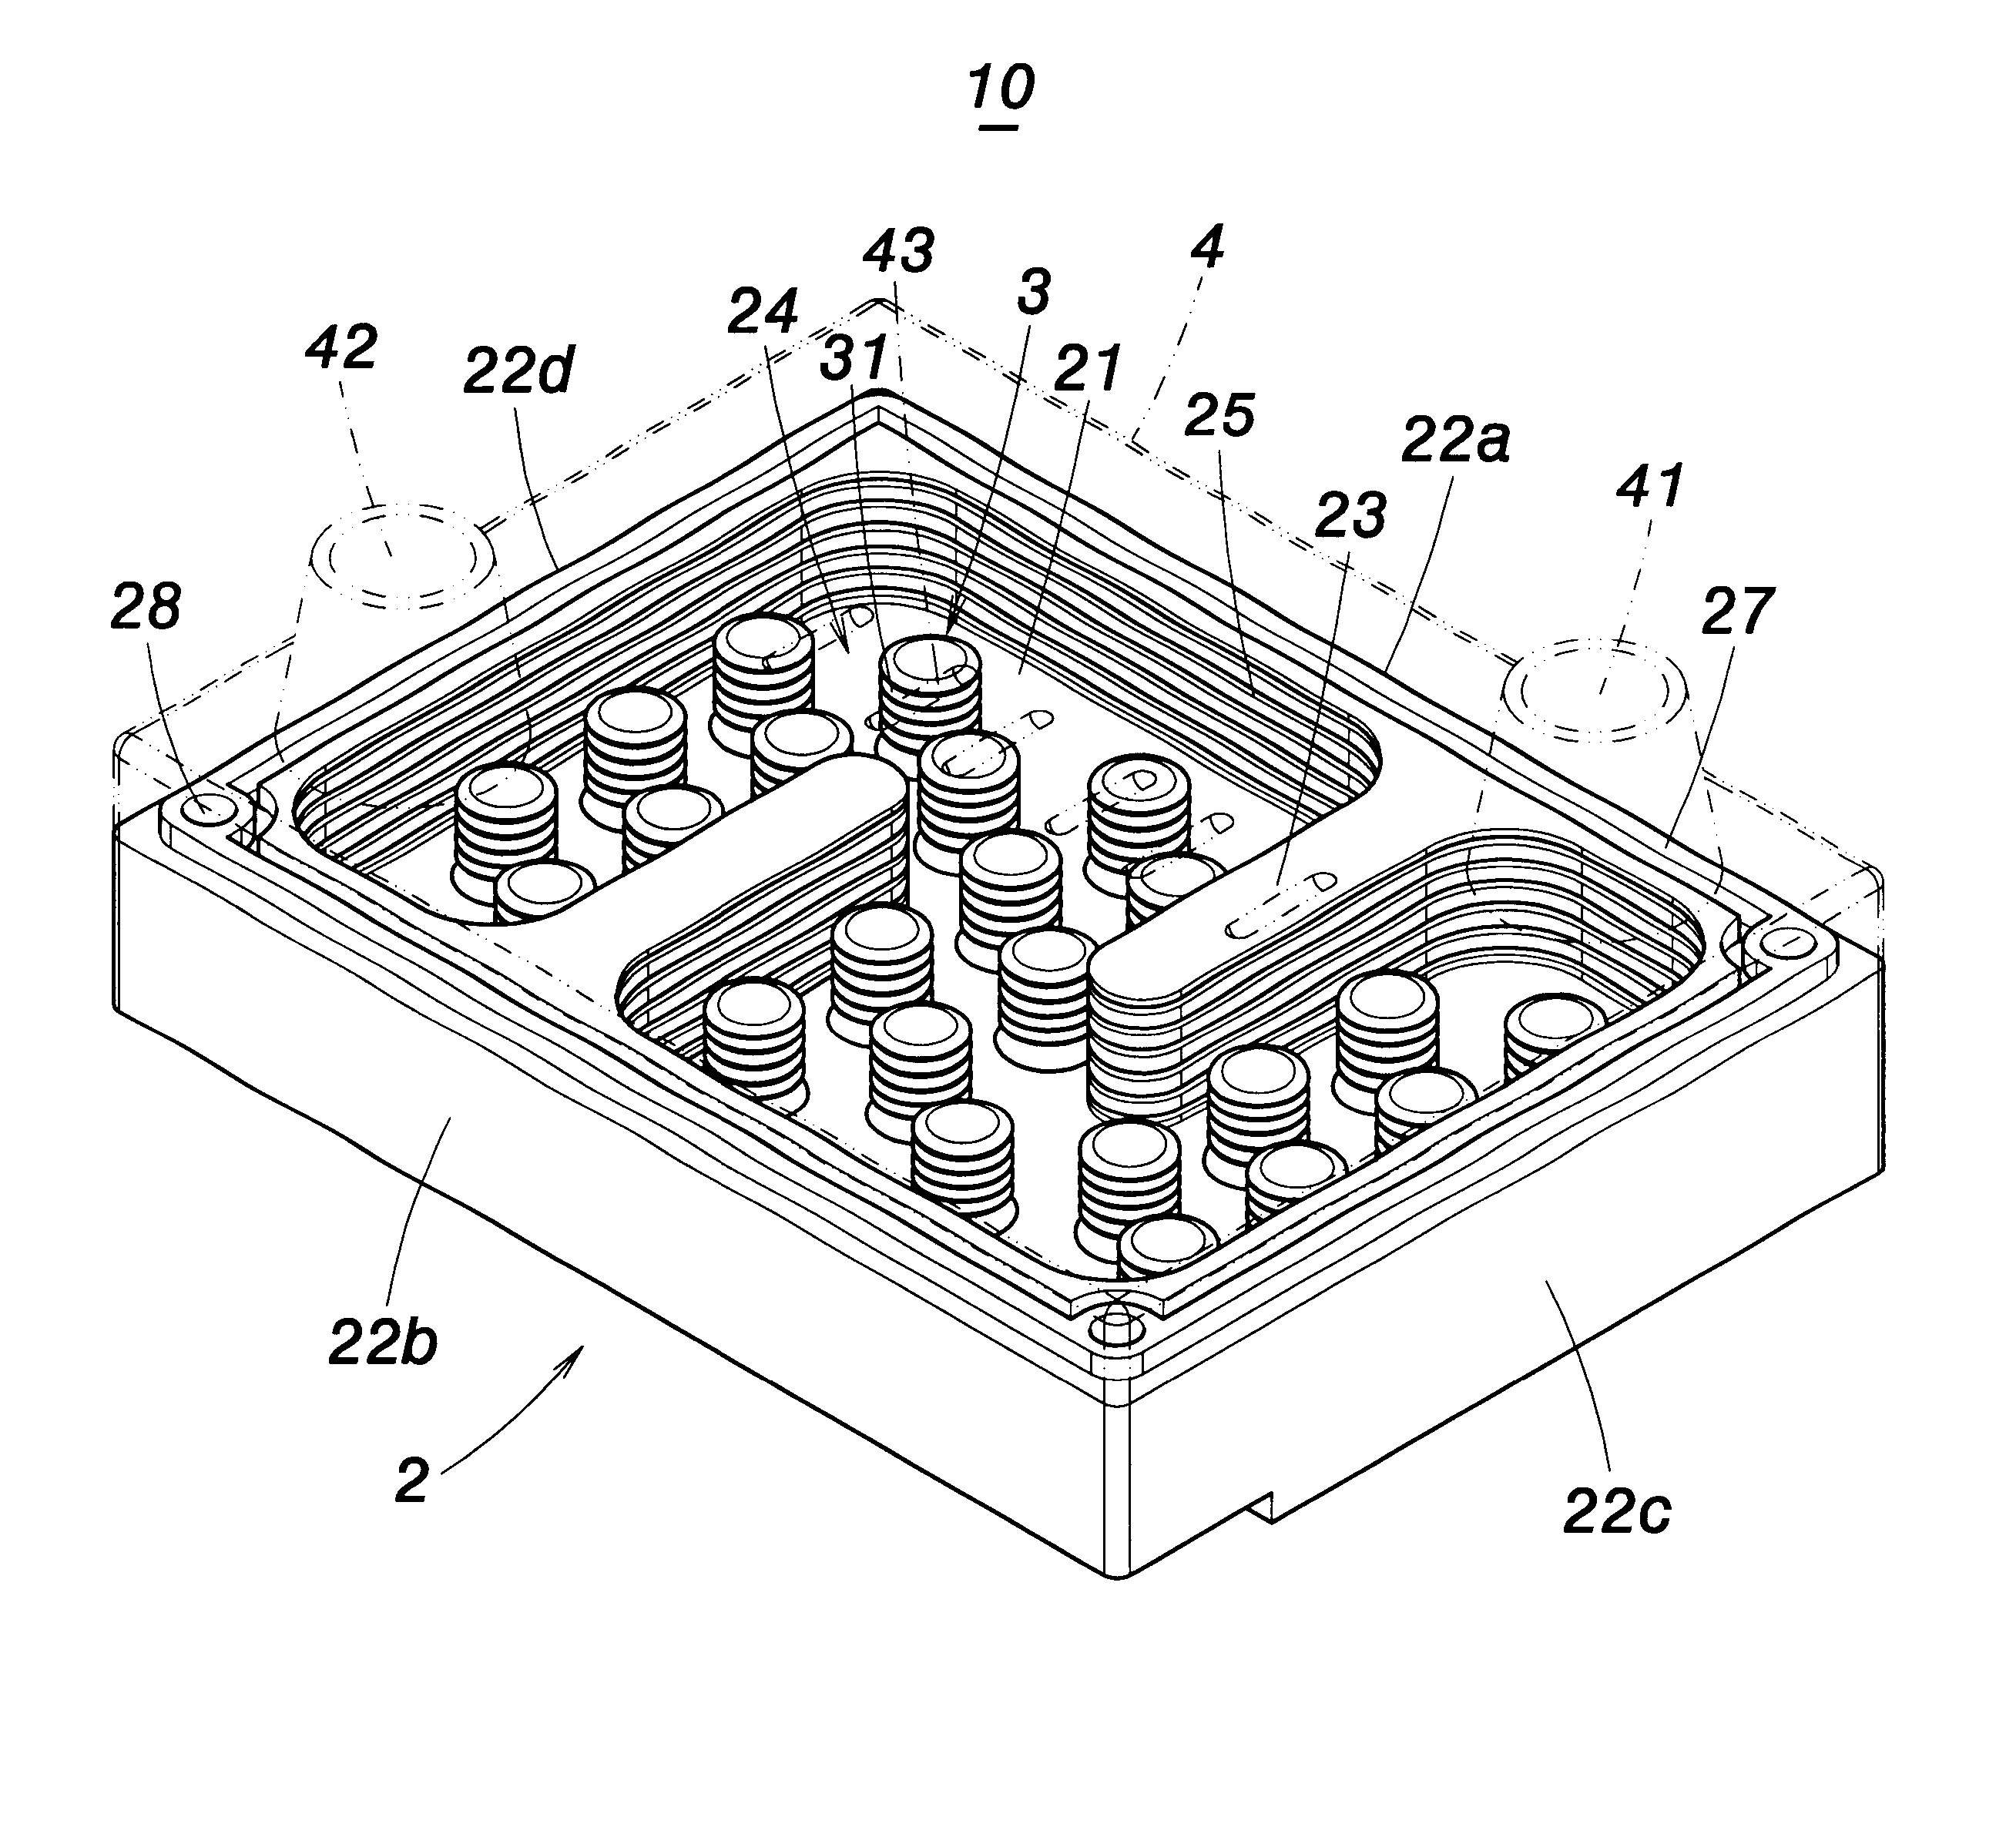 Heat dissipation device by liquid cooling